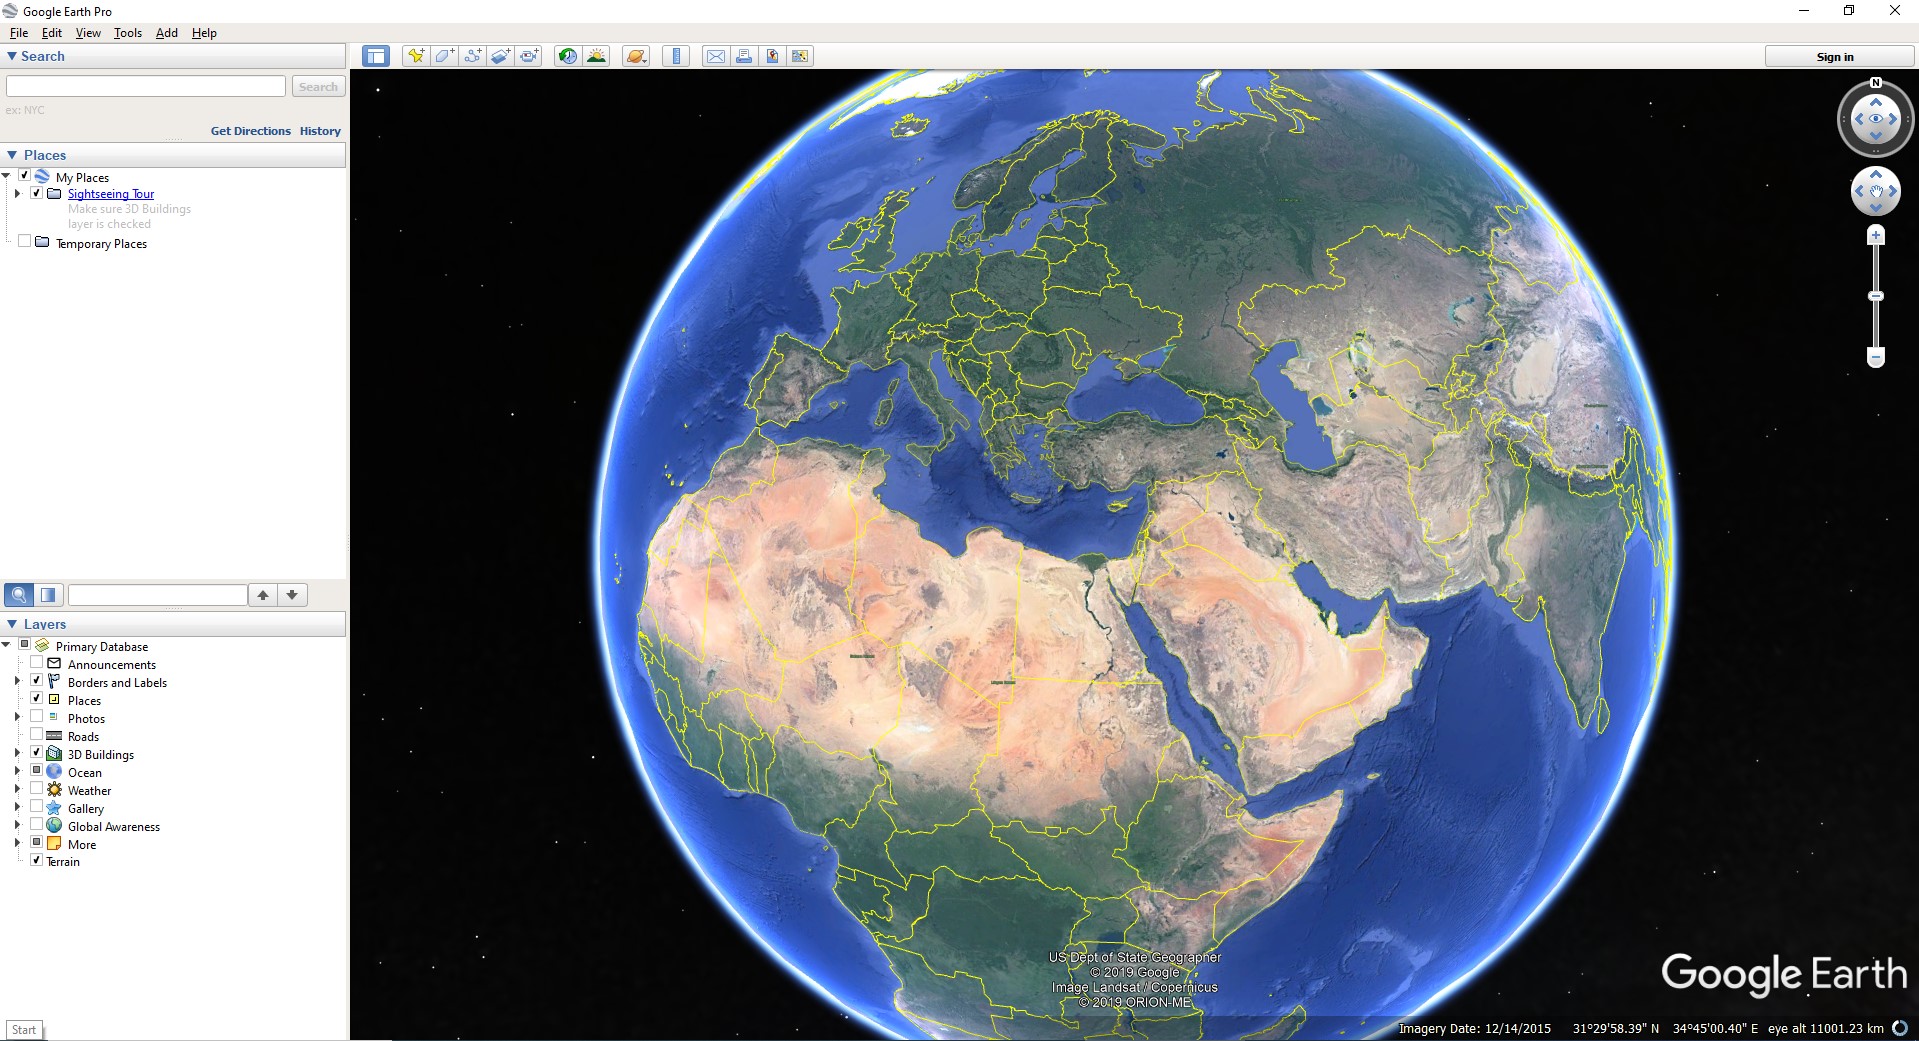 paid version of google earth